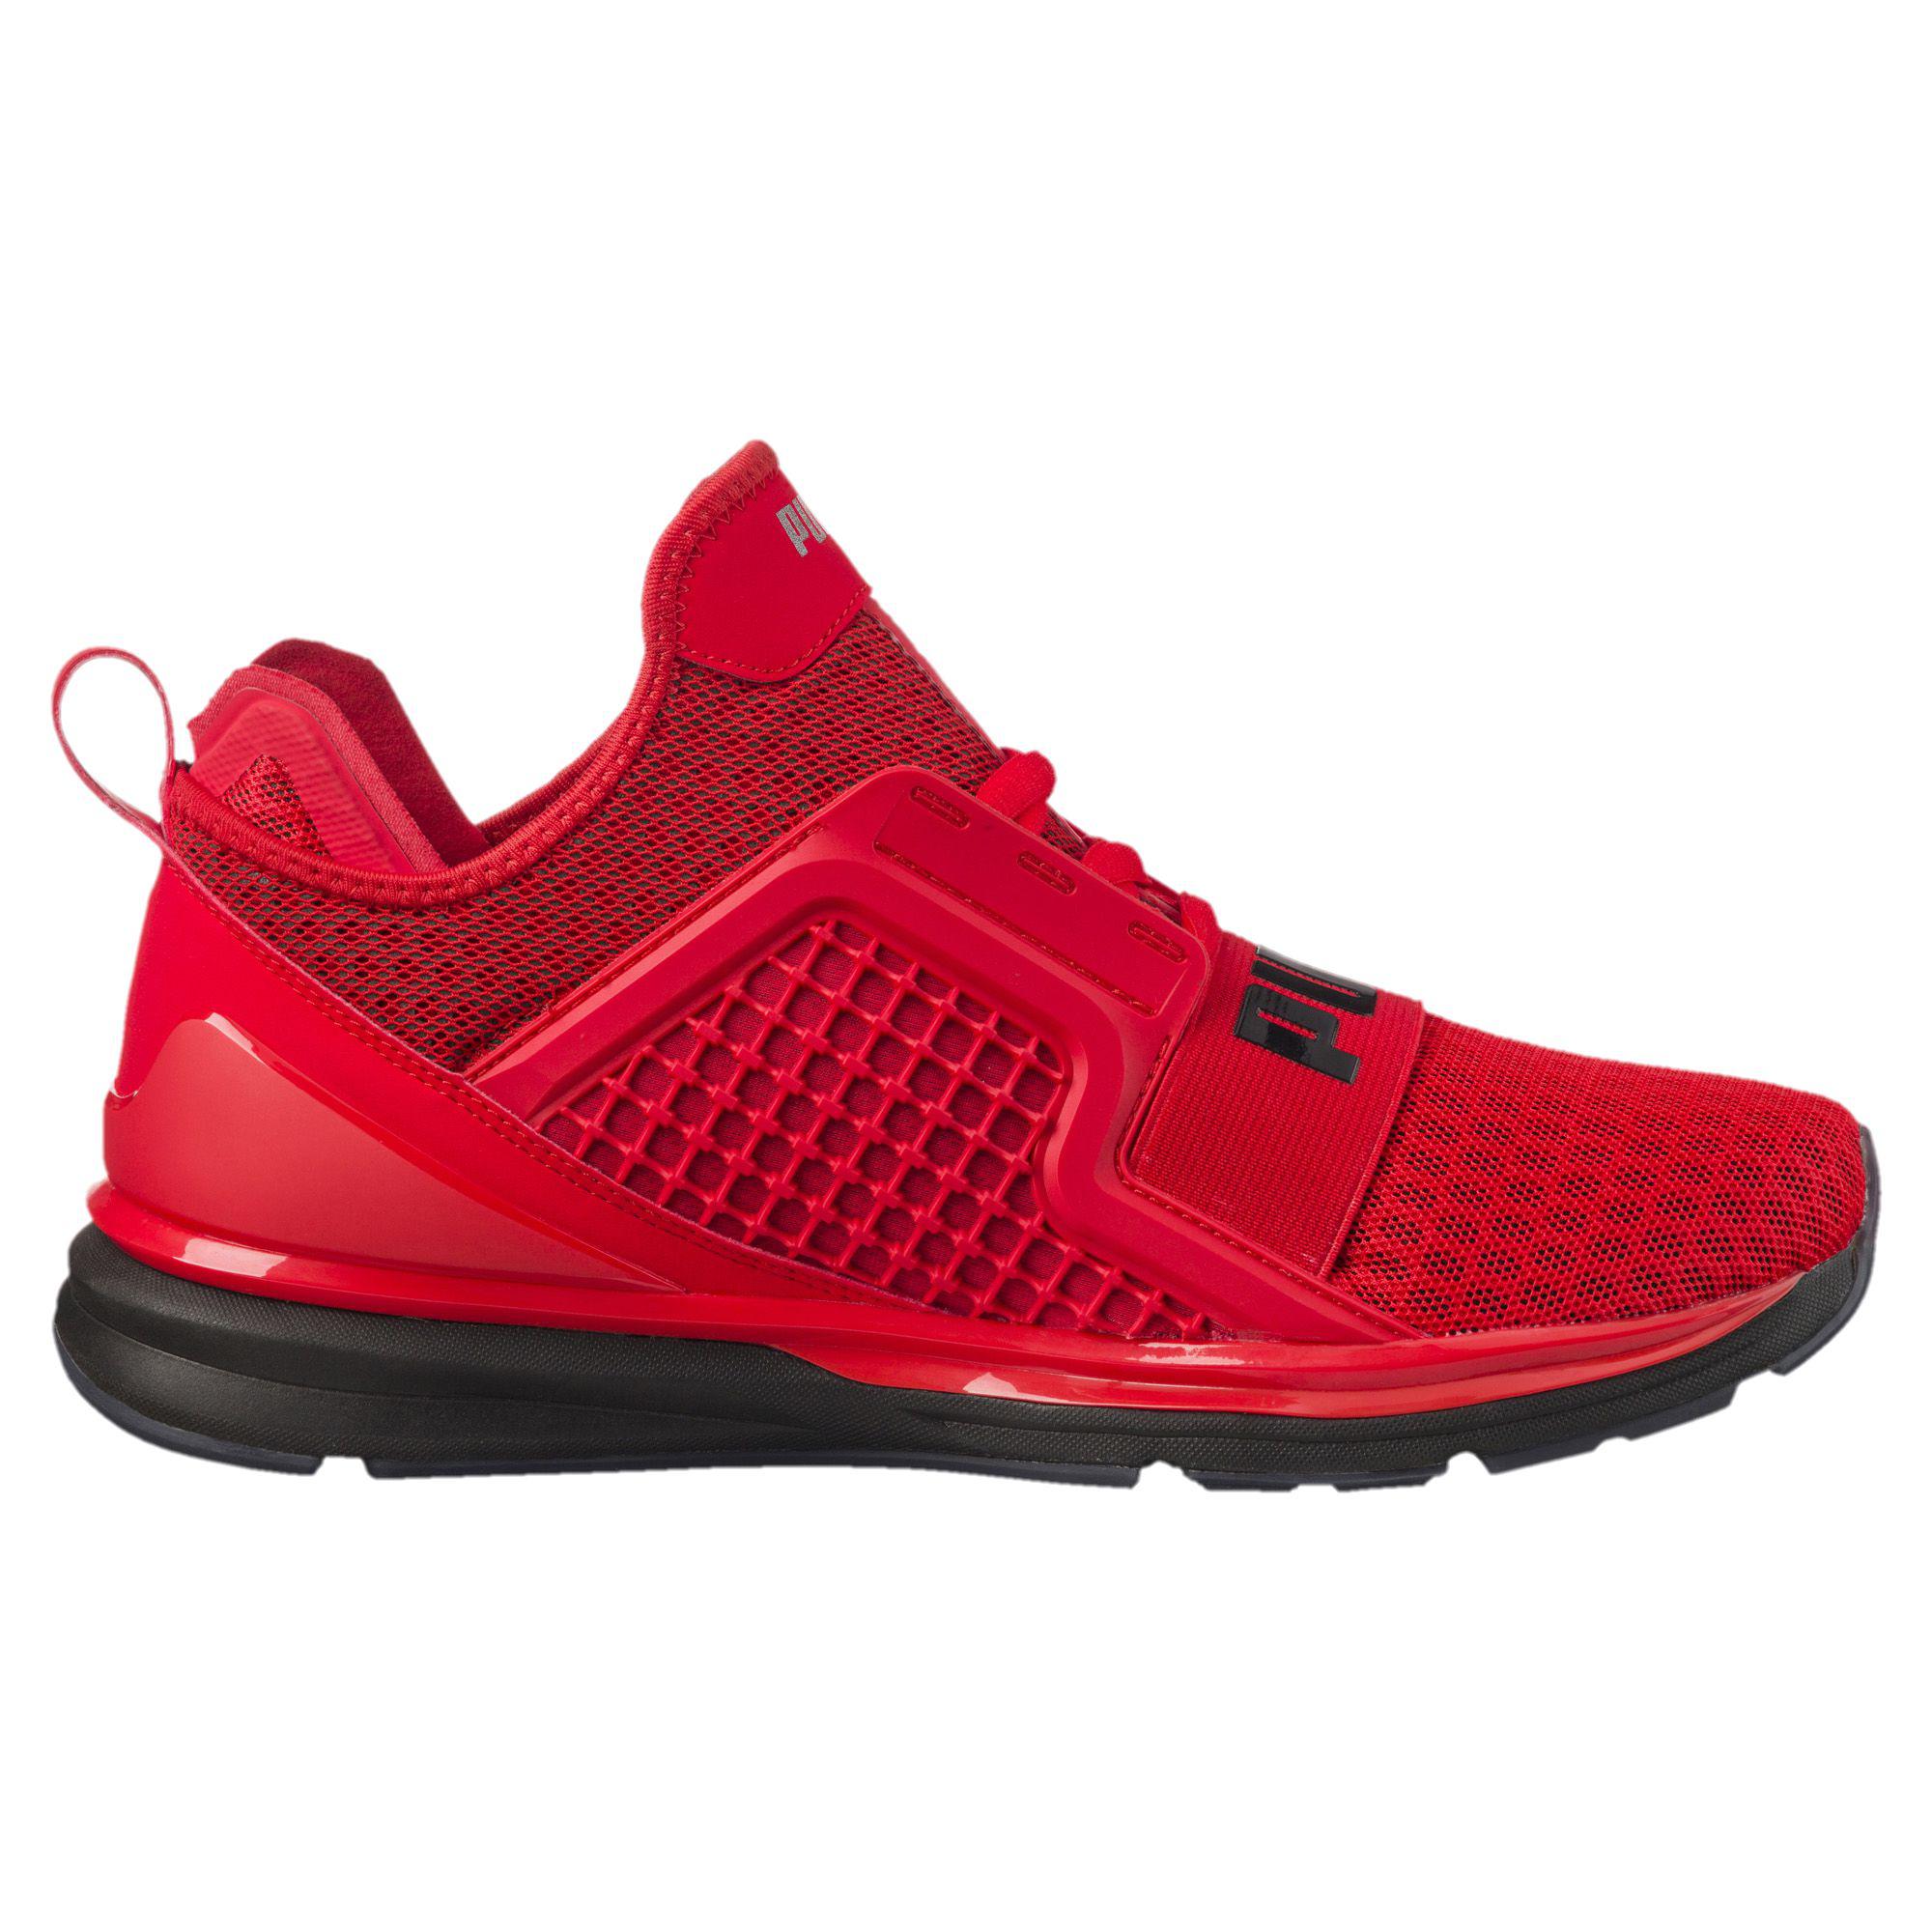 PUMA Rubber Ignite Limitless Men's Training Shoes in Red for Men - Lyst